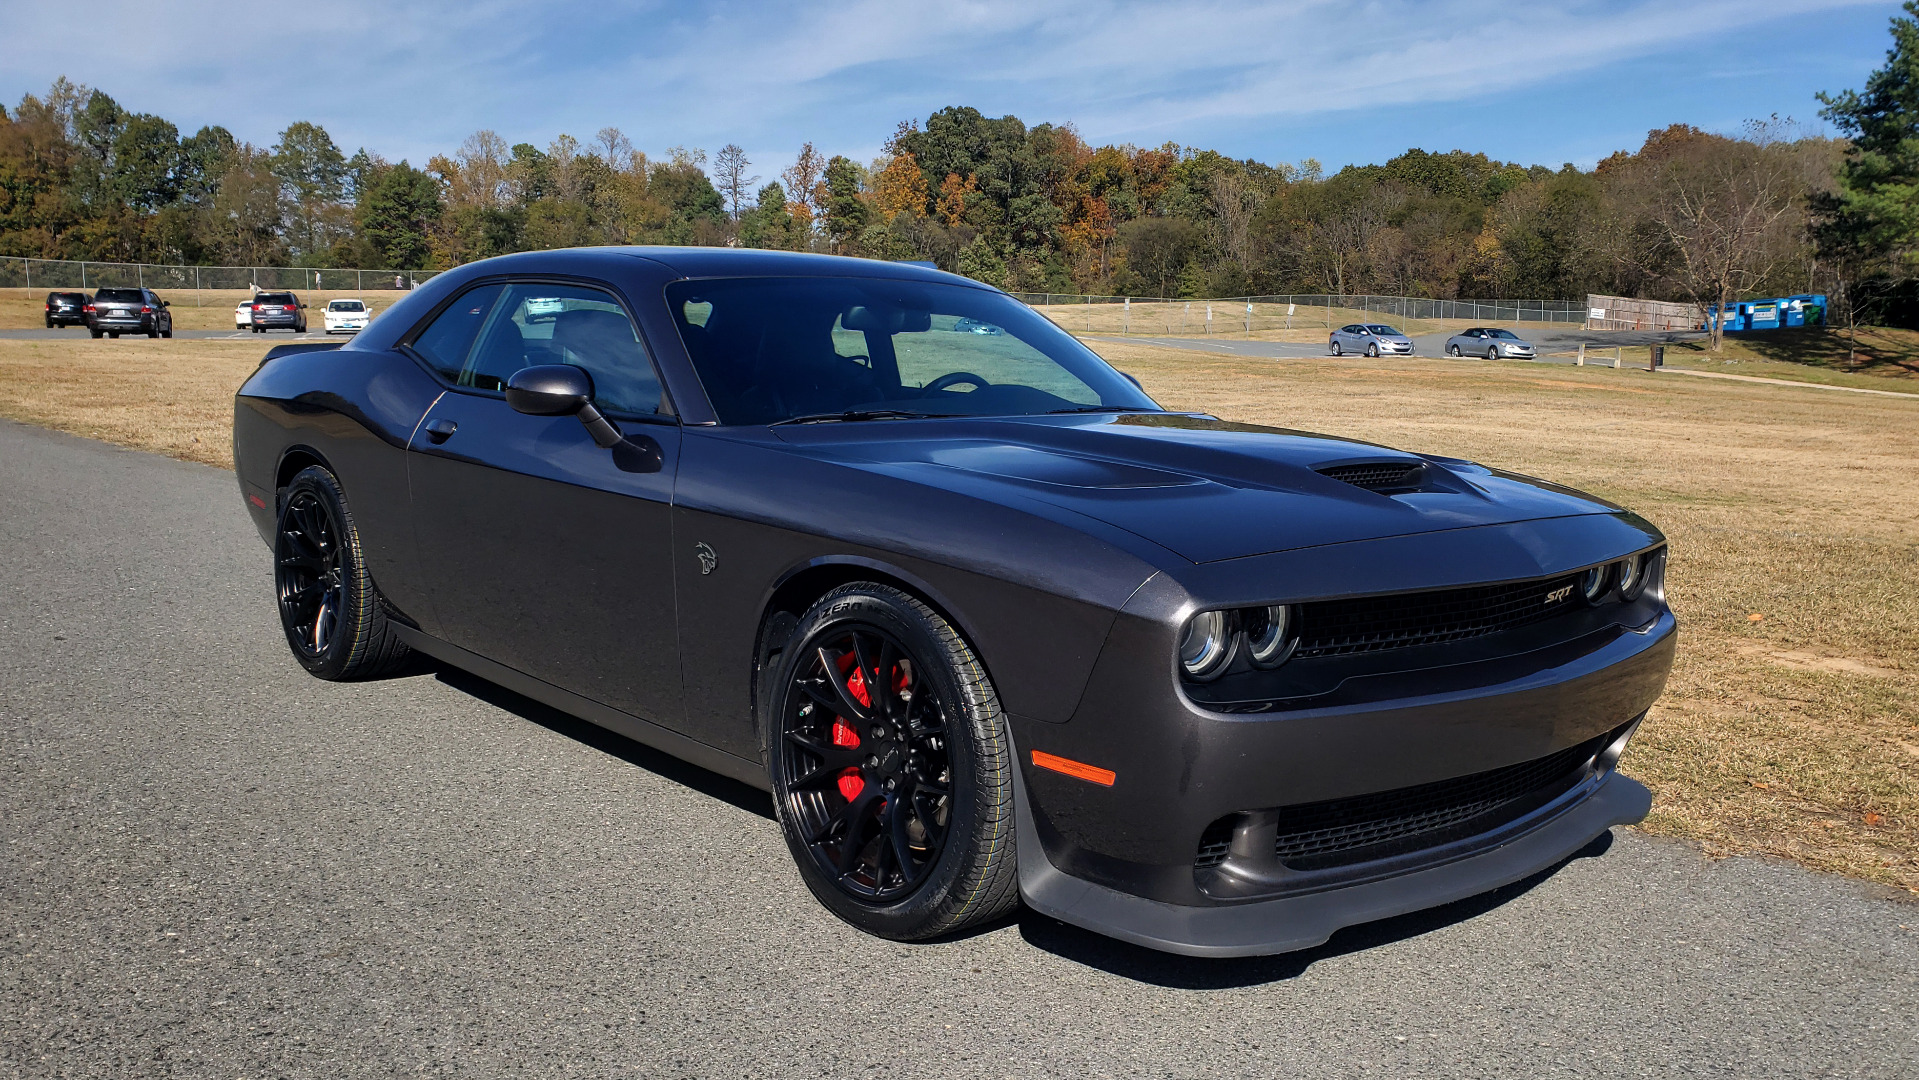 Used 2016 Dodge CHALLENGER SRT HELLCAT COUPE / 6-SPD MAN / NAV / SRT APPS / REARVIEW for sale Sold at Formula Imports in Charlotte NC 28227 13